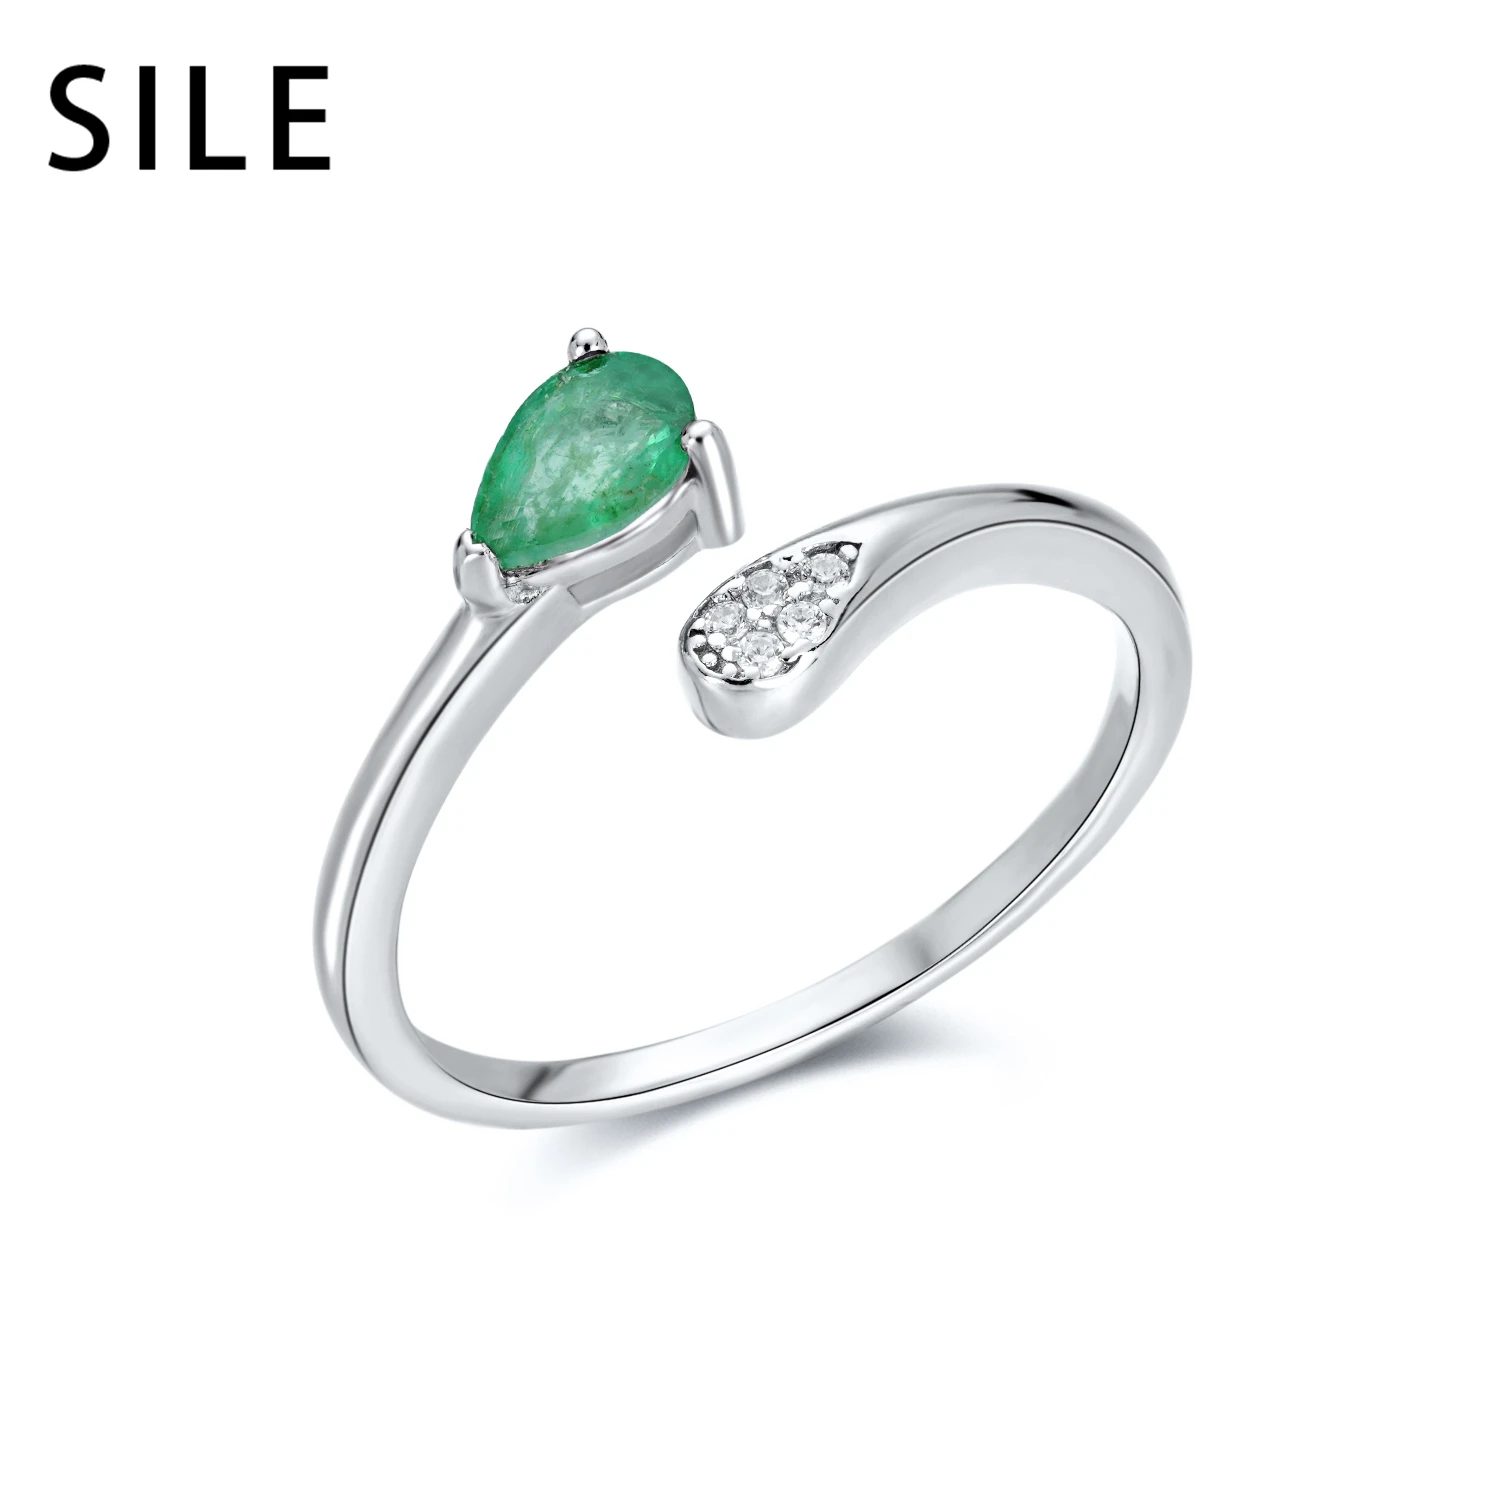 

SILE Adjustable Opening Rings For Women Simple 925 Sterling Silver Emerald Stones Ring Wedding Engagement Finger Jewelry anillos